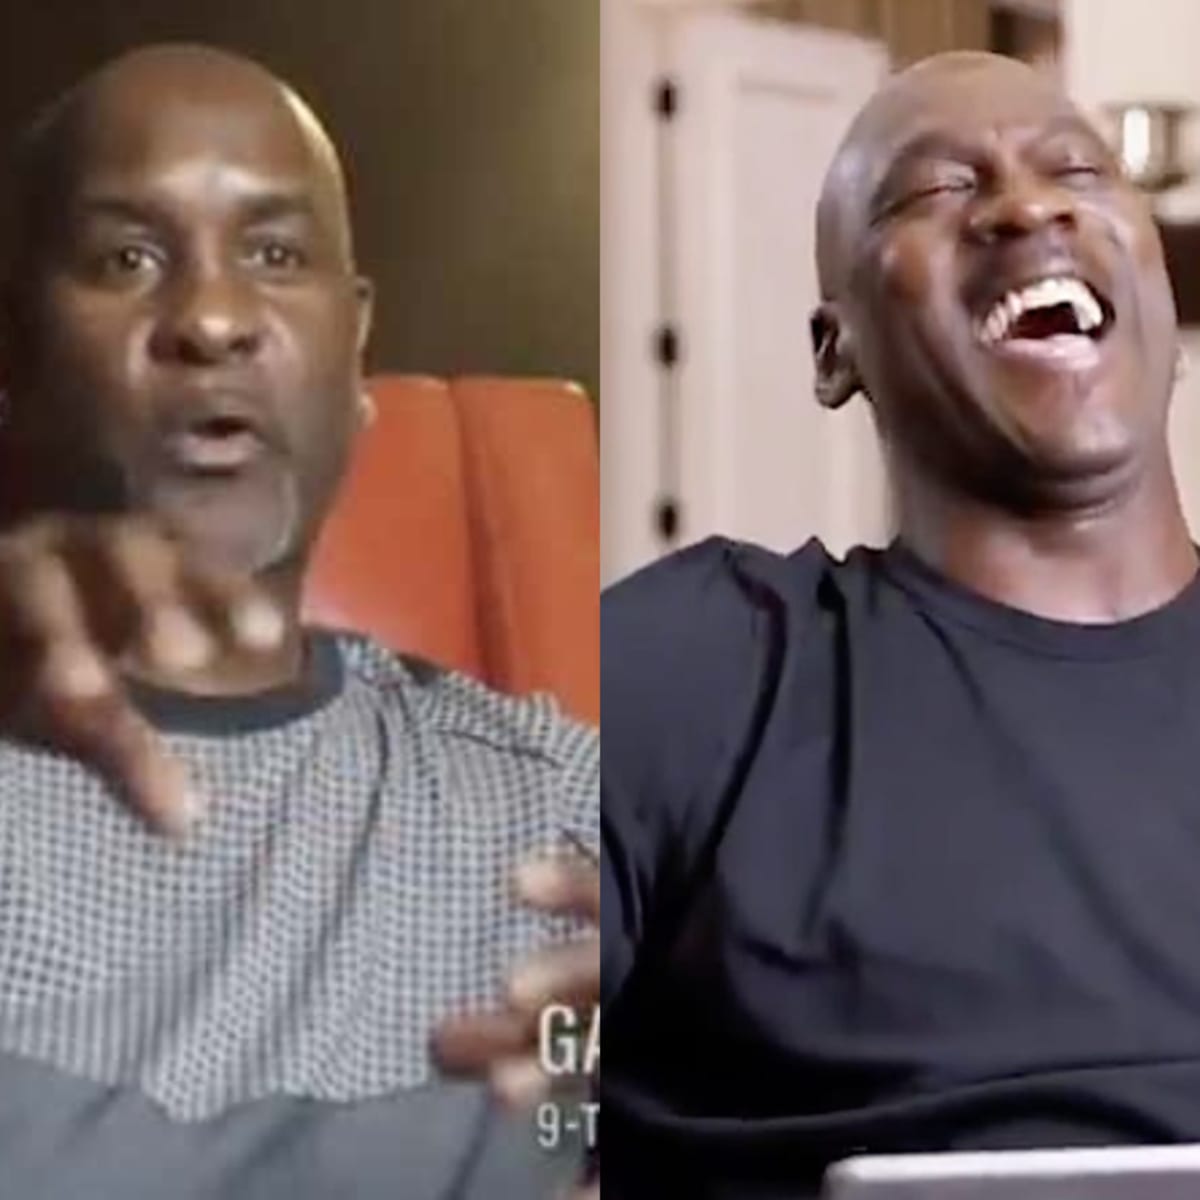 Gary Payton responds to Michael Jordan laughing at him in the Last Dance  documentary - Basketball Network - Your daily dose of basketball